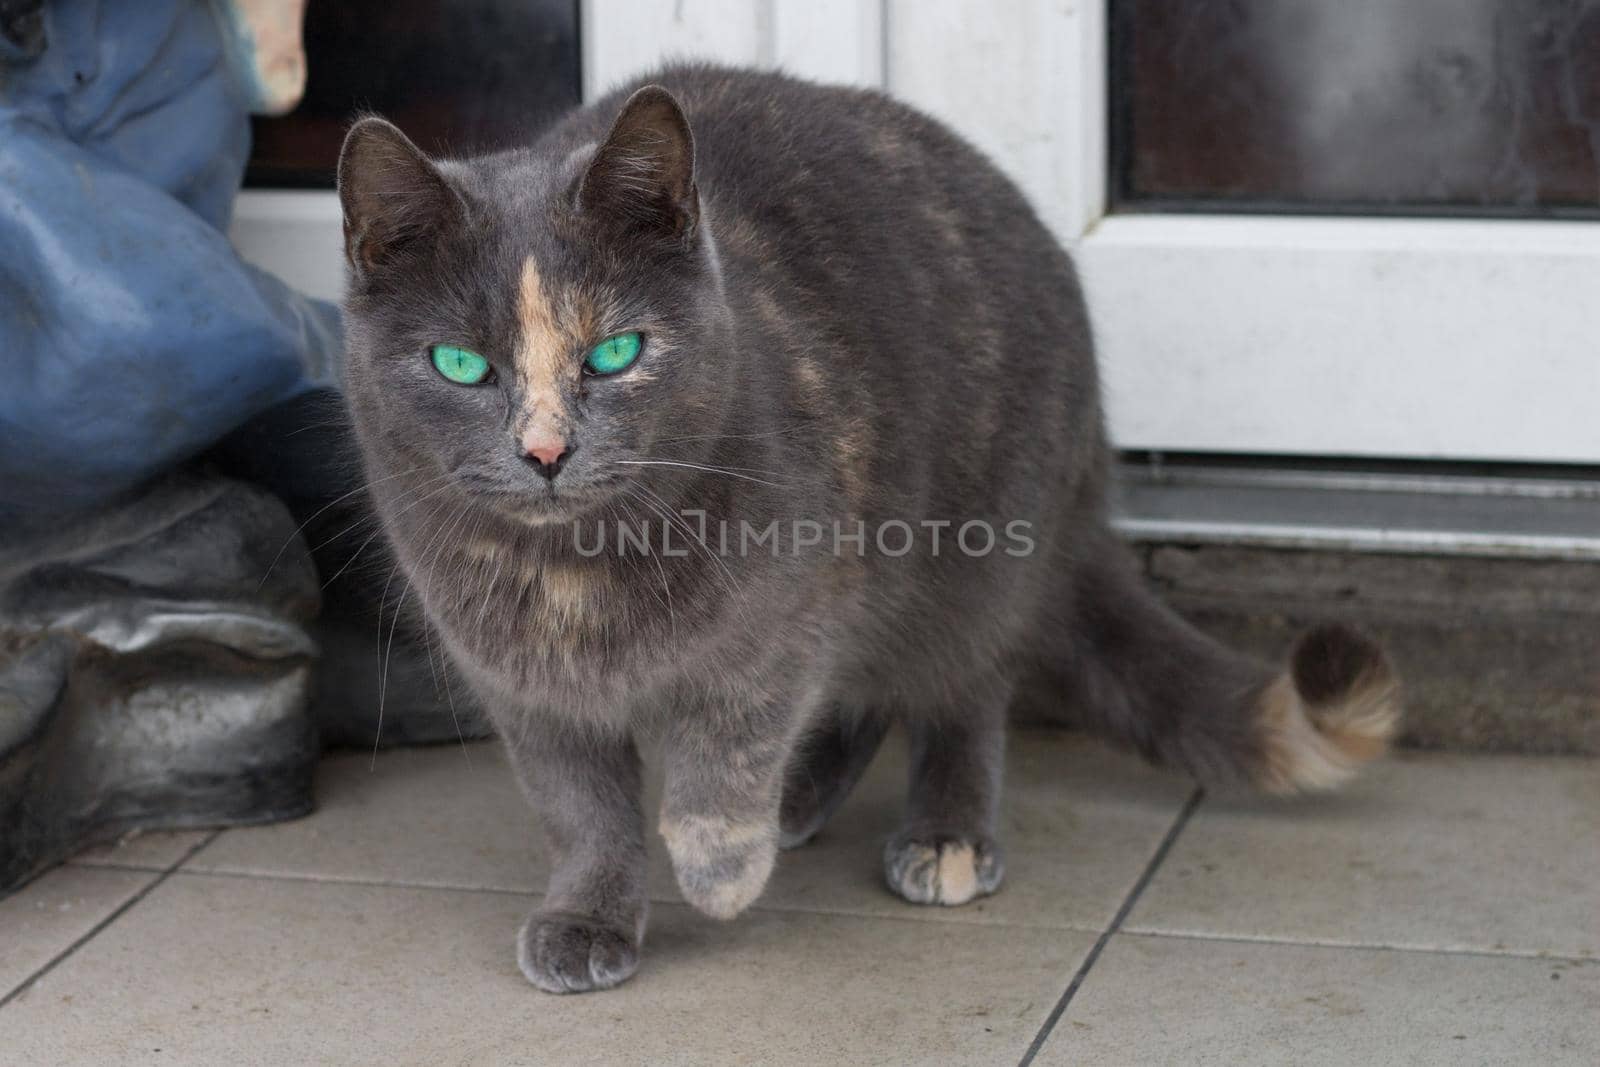 Close up of small gray striped furry cat with bright green eyes